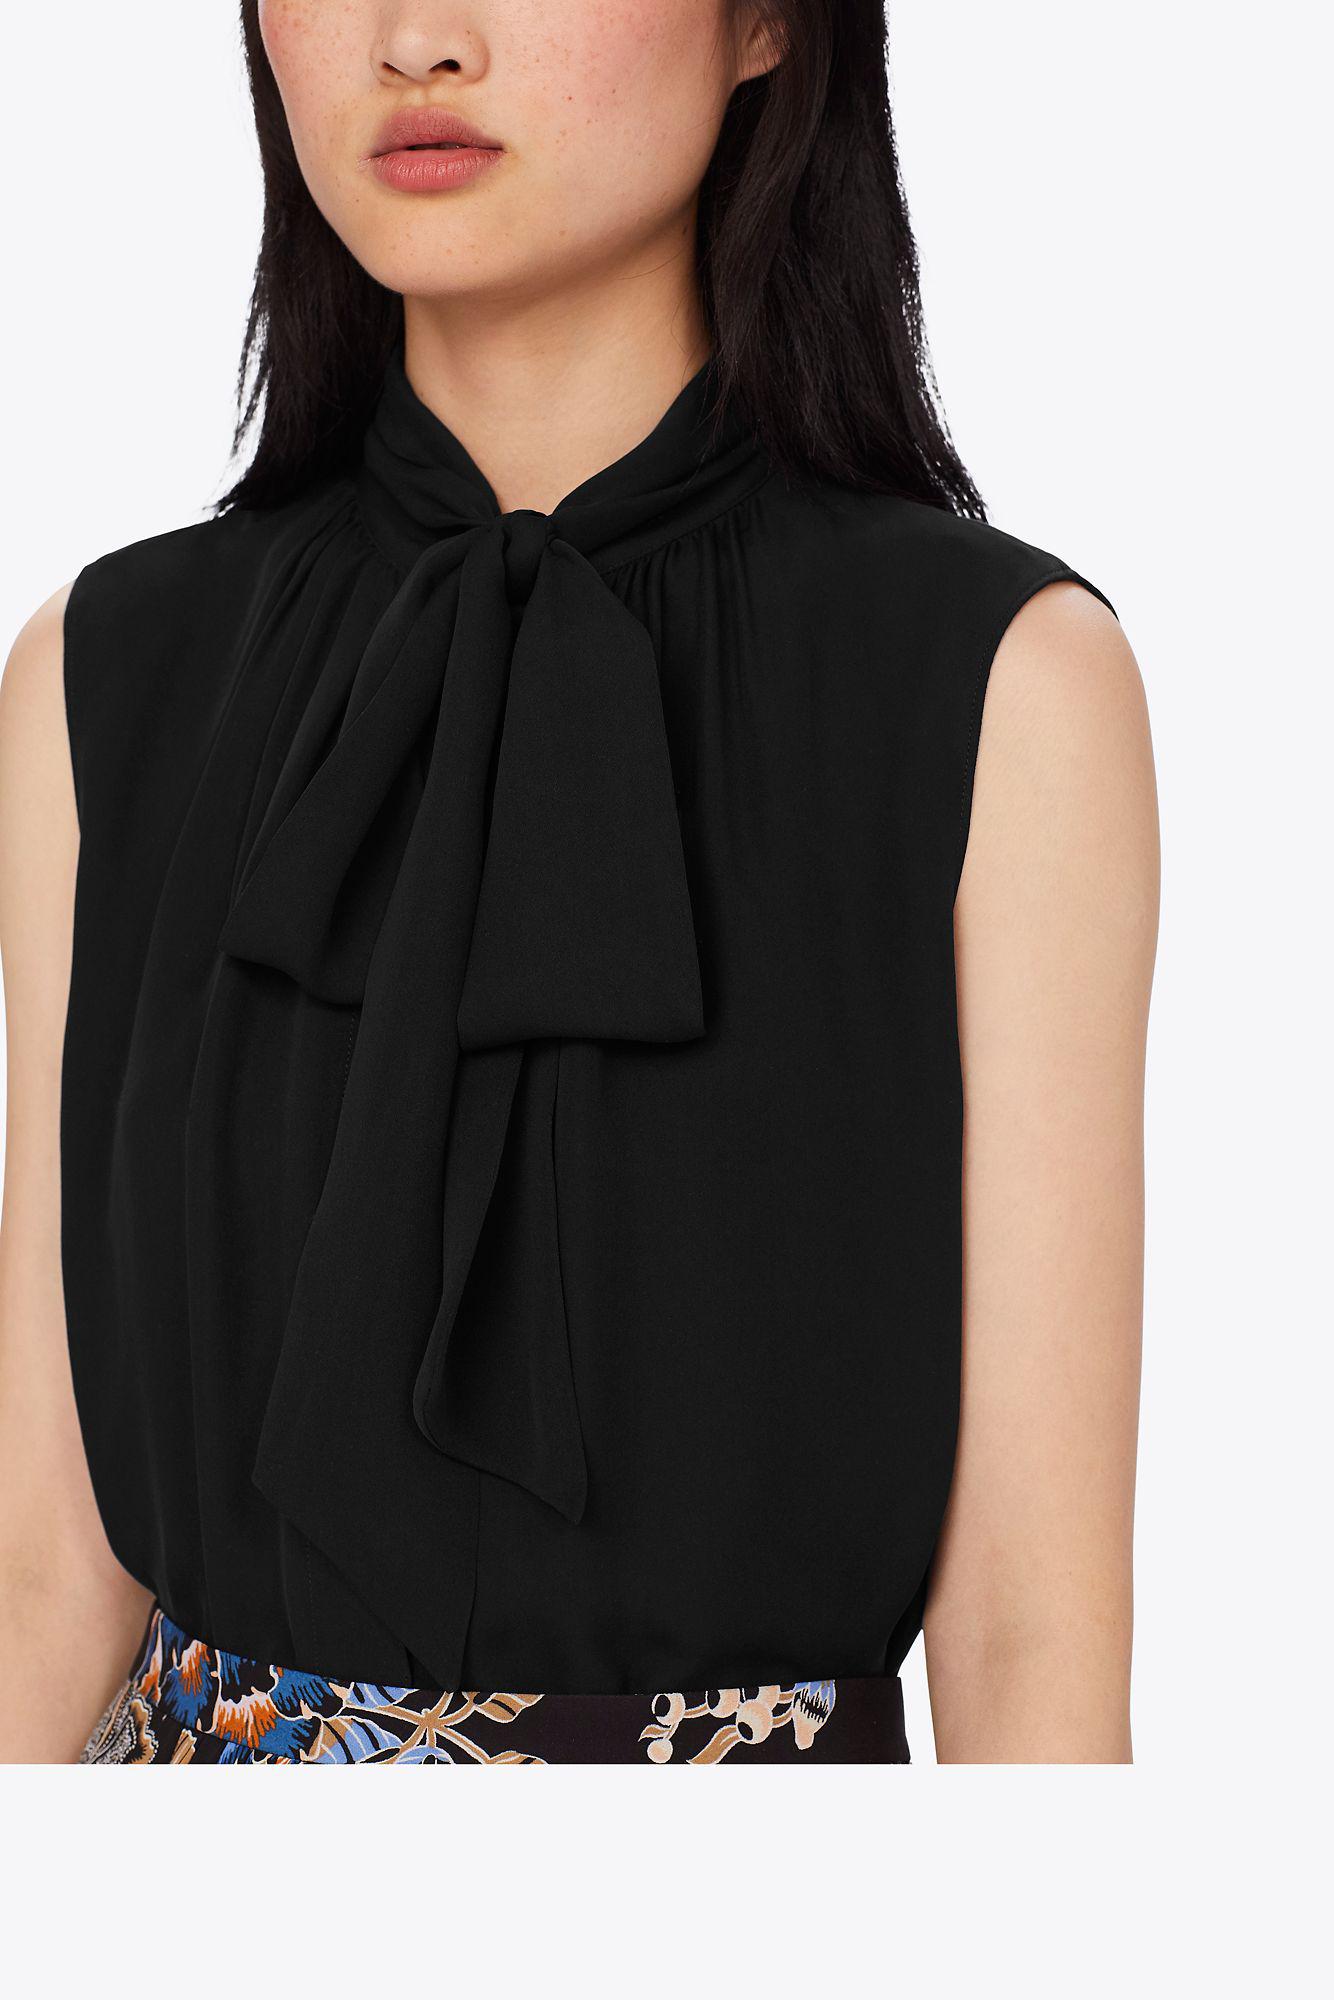 Tory Burch Sleeveless Bow Blouse in Black | Lyst